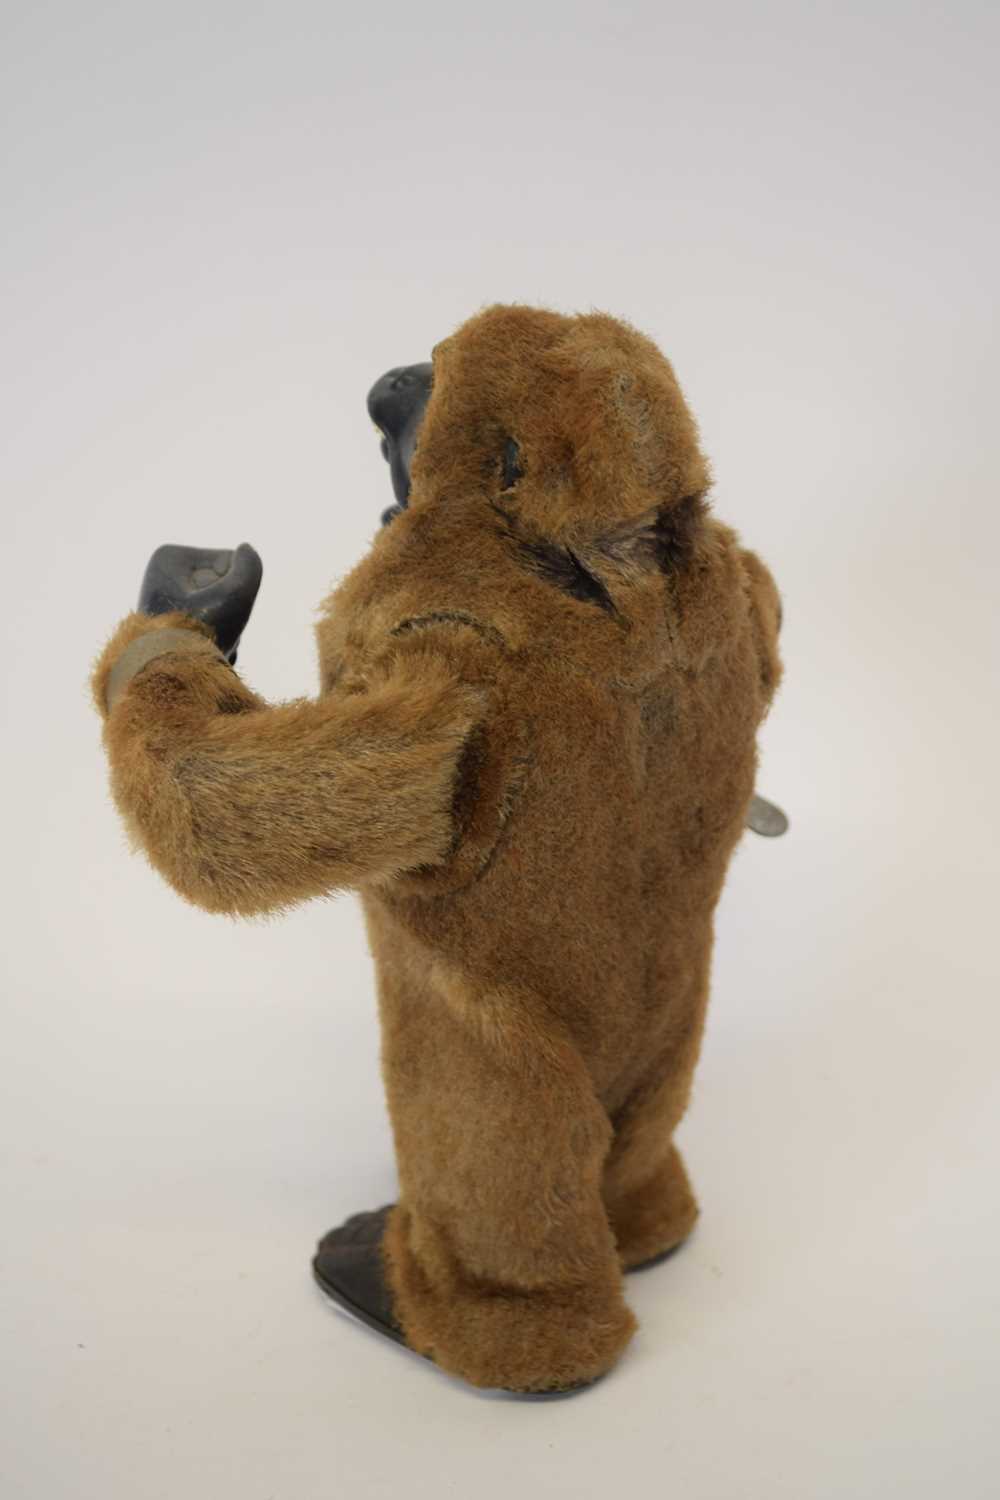 Louis Marx Toys (Japan) mechanical gorilla with clockwork motor and fur covering, 20cm high - Image 2 of 2